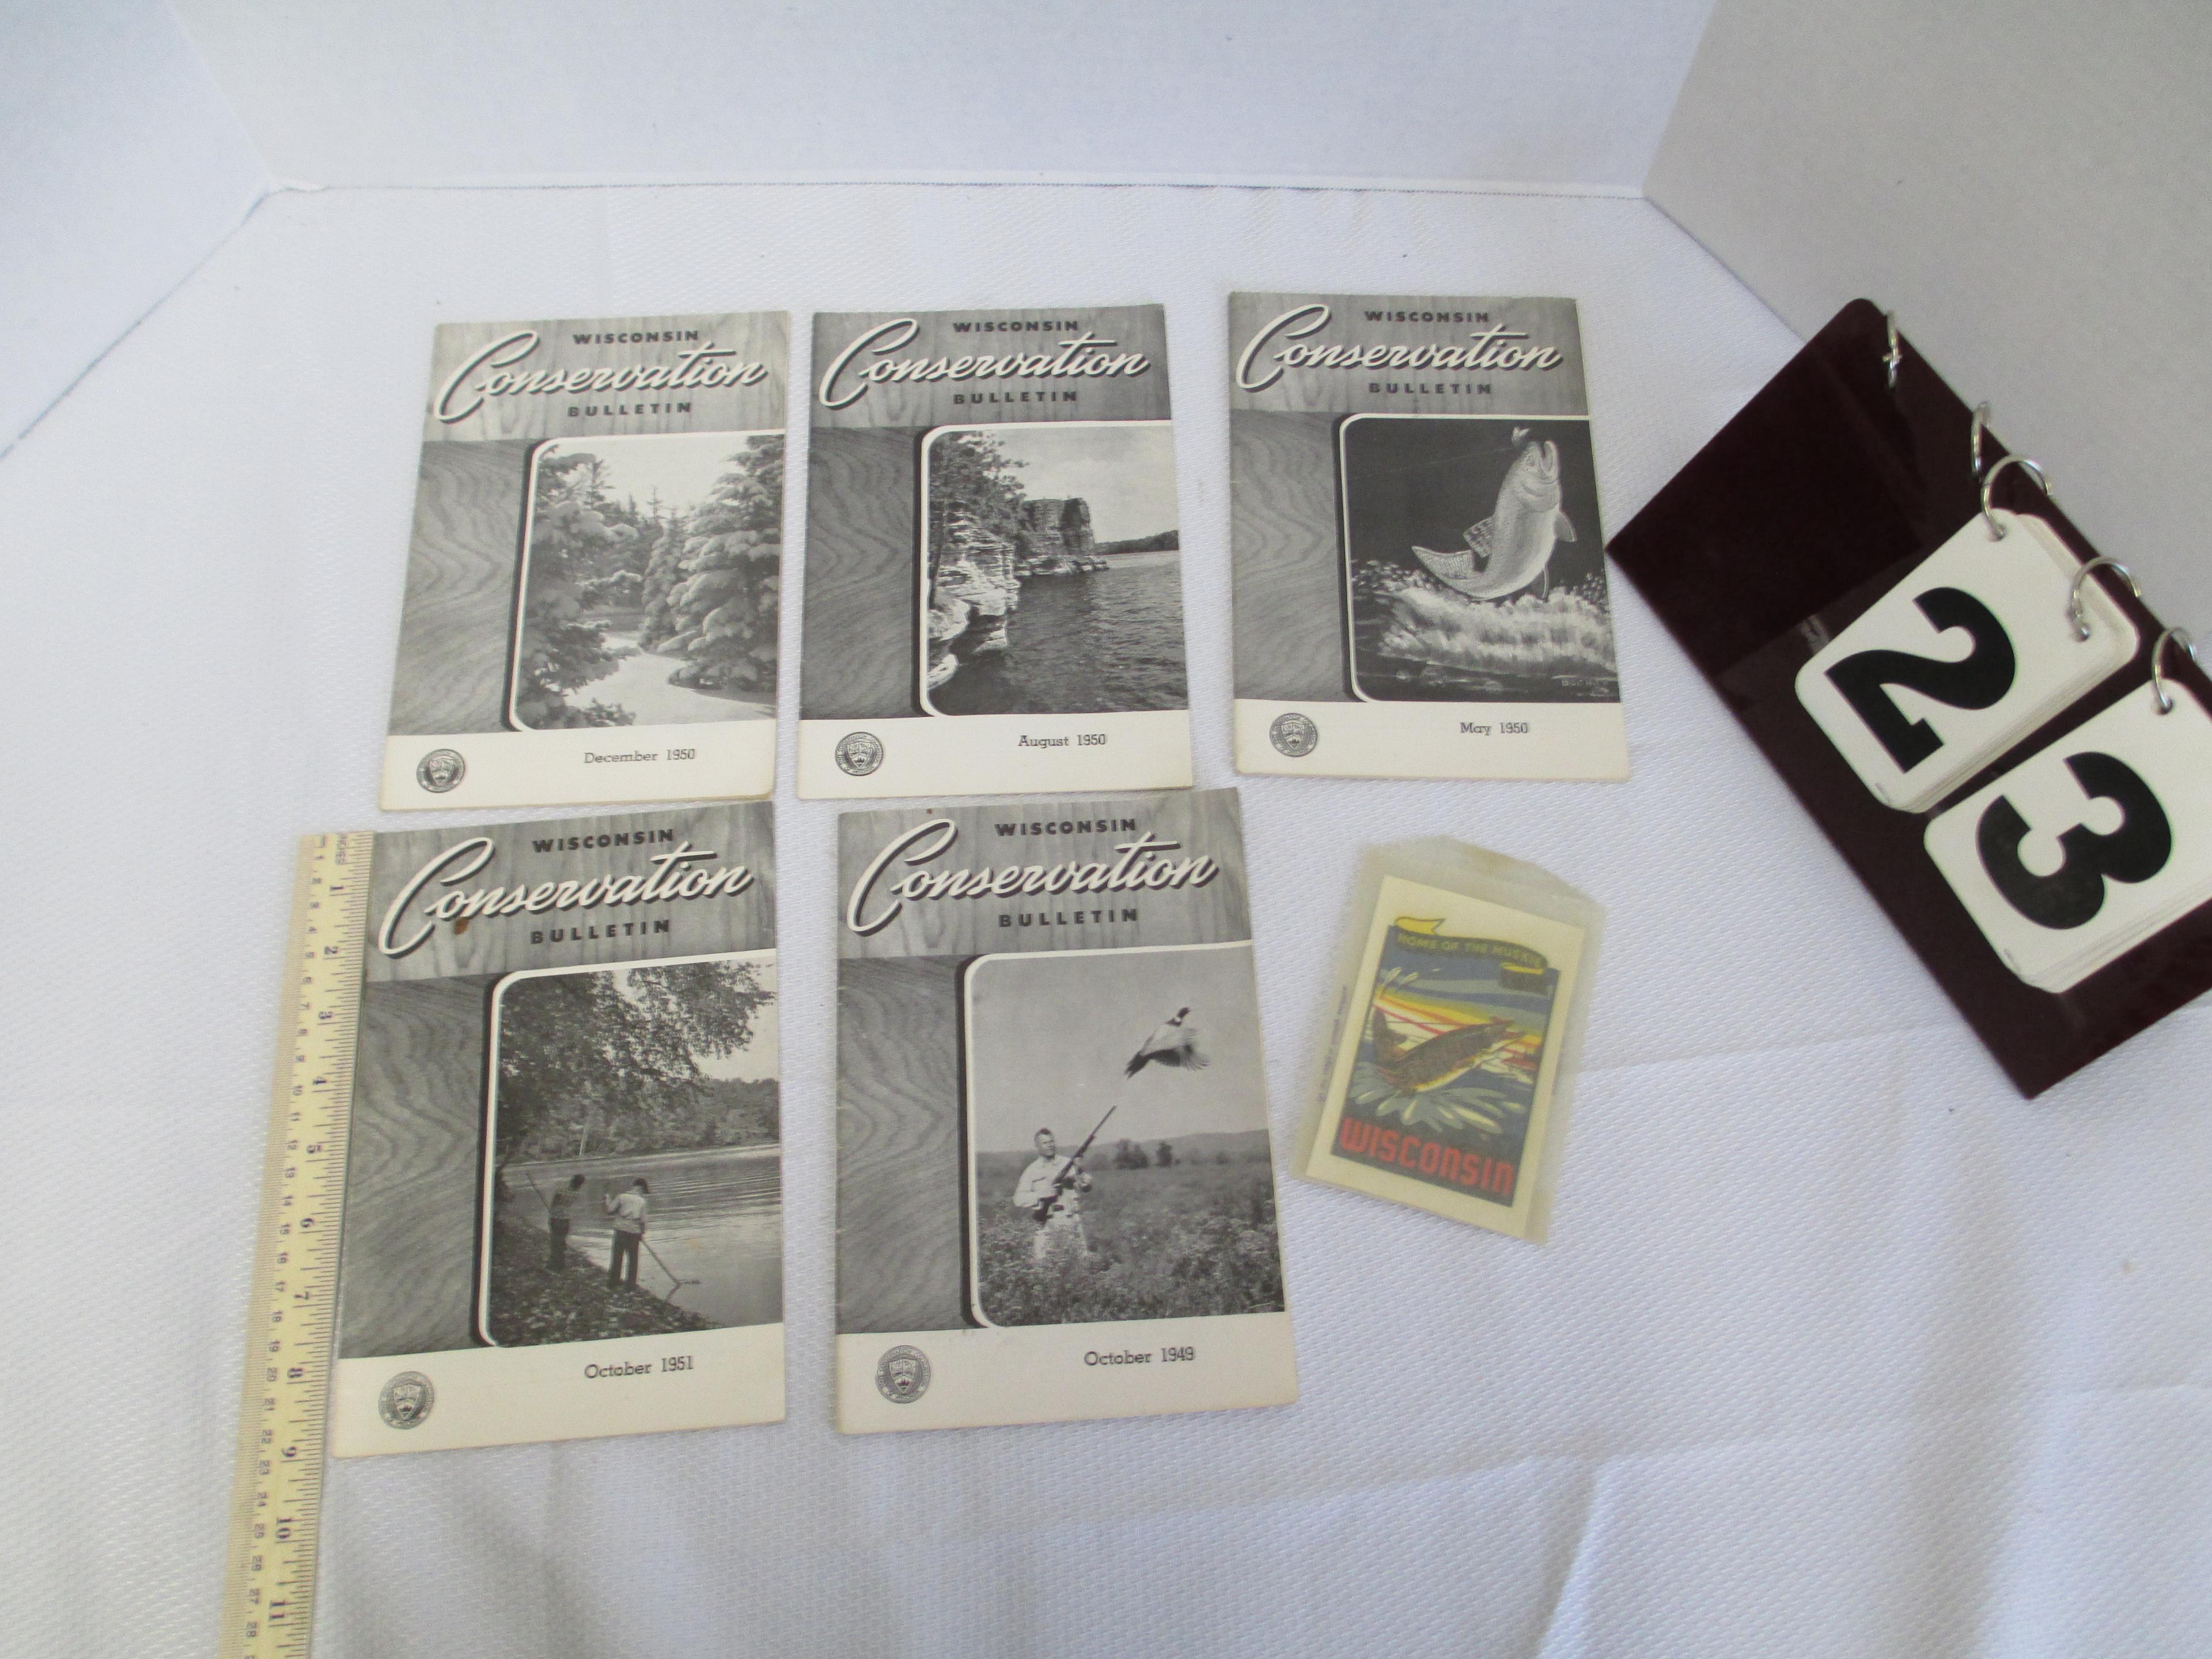 1949-1951 Wisconsin Conservation Bulletins